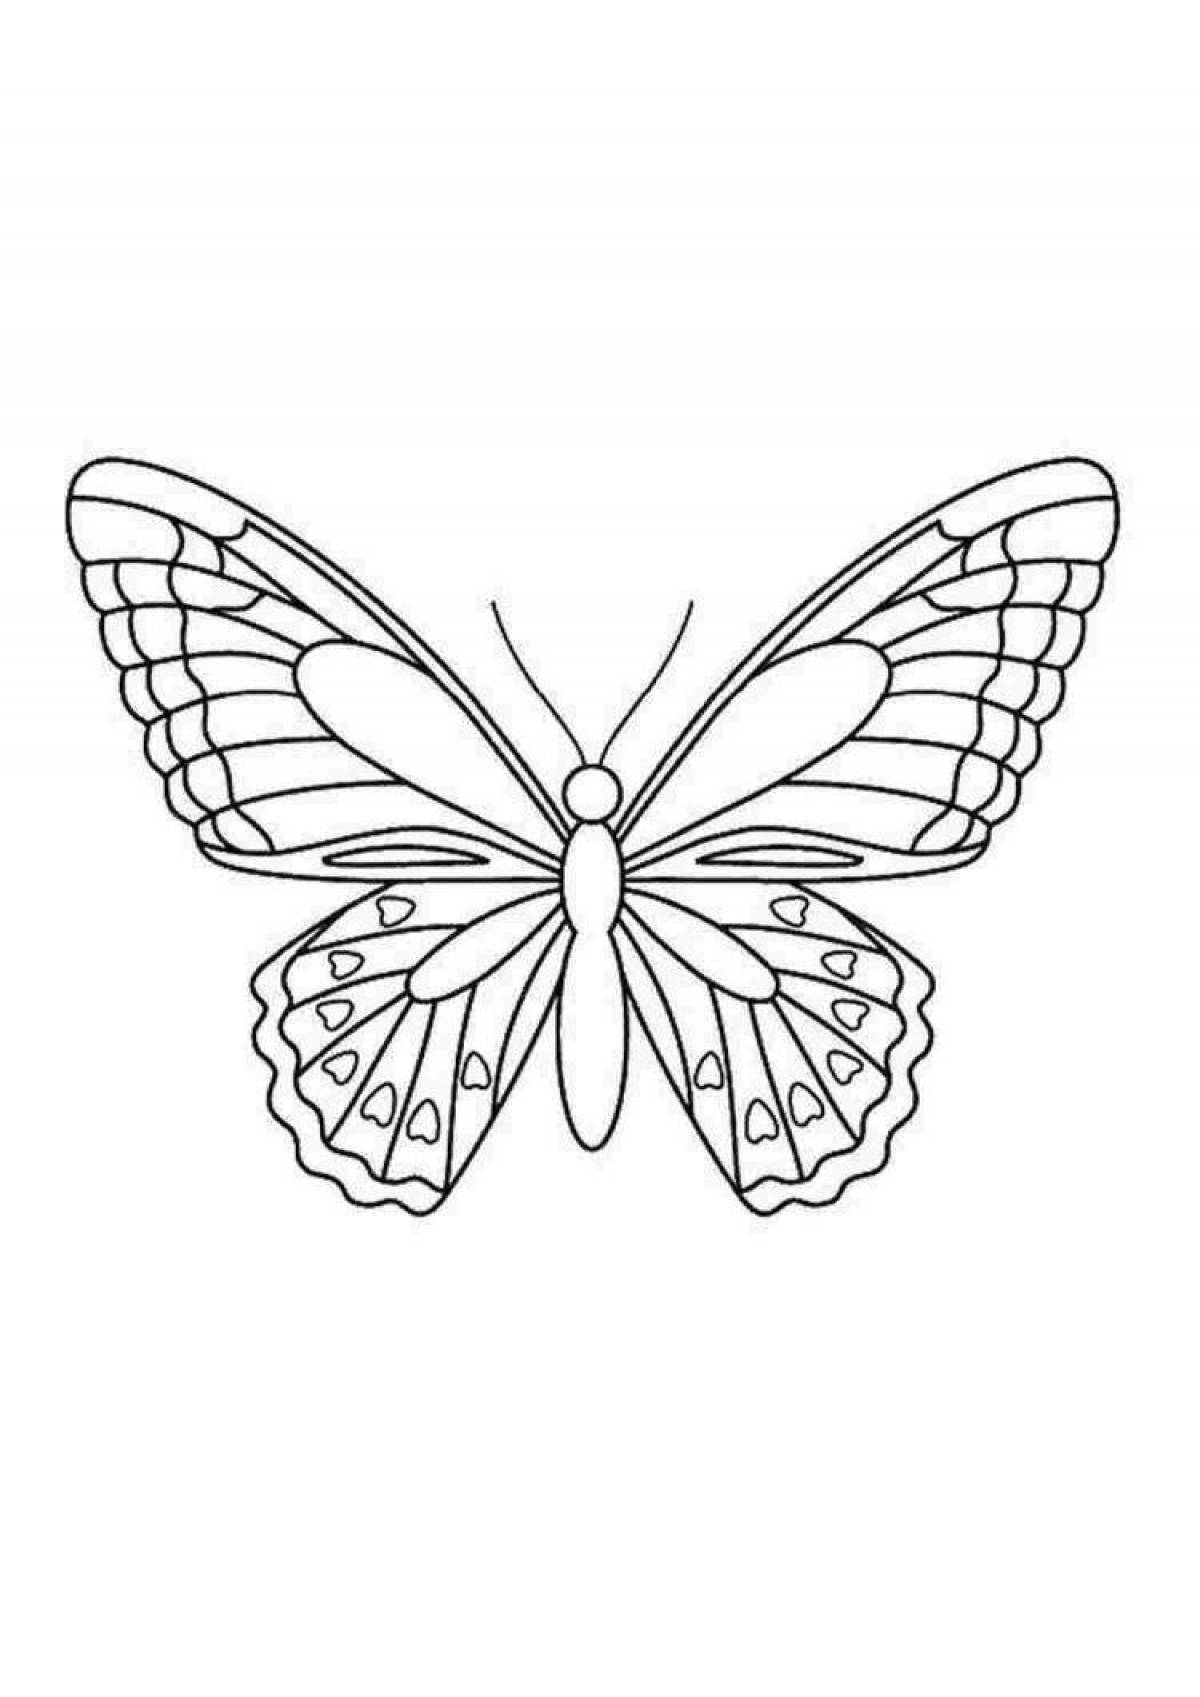 Adorable butterfly coloring page